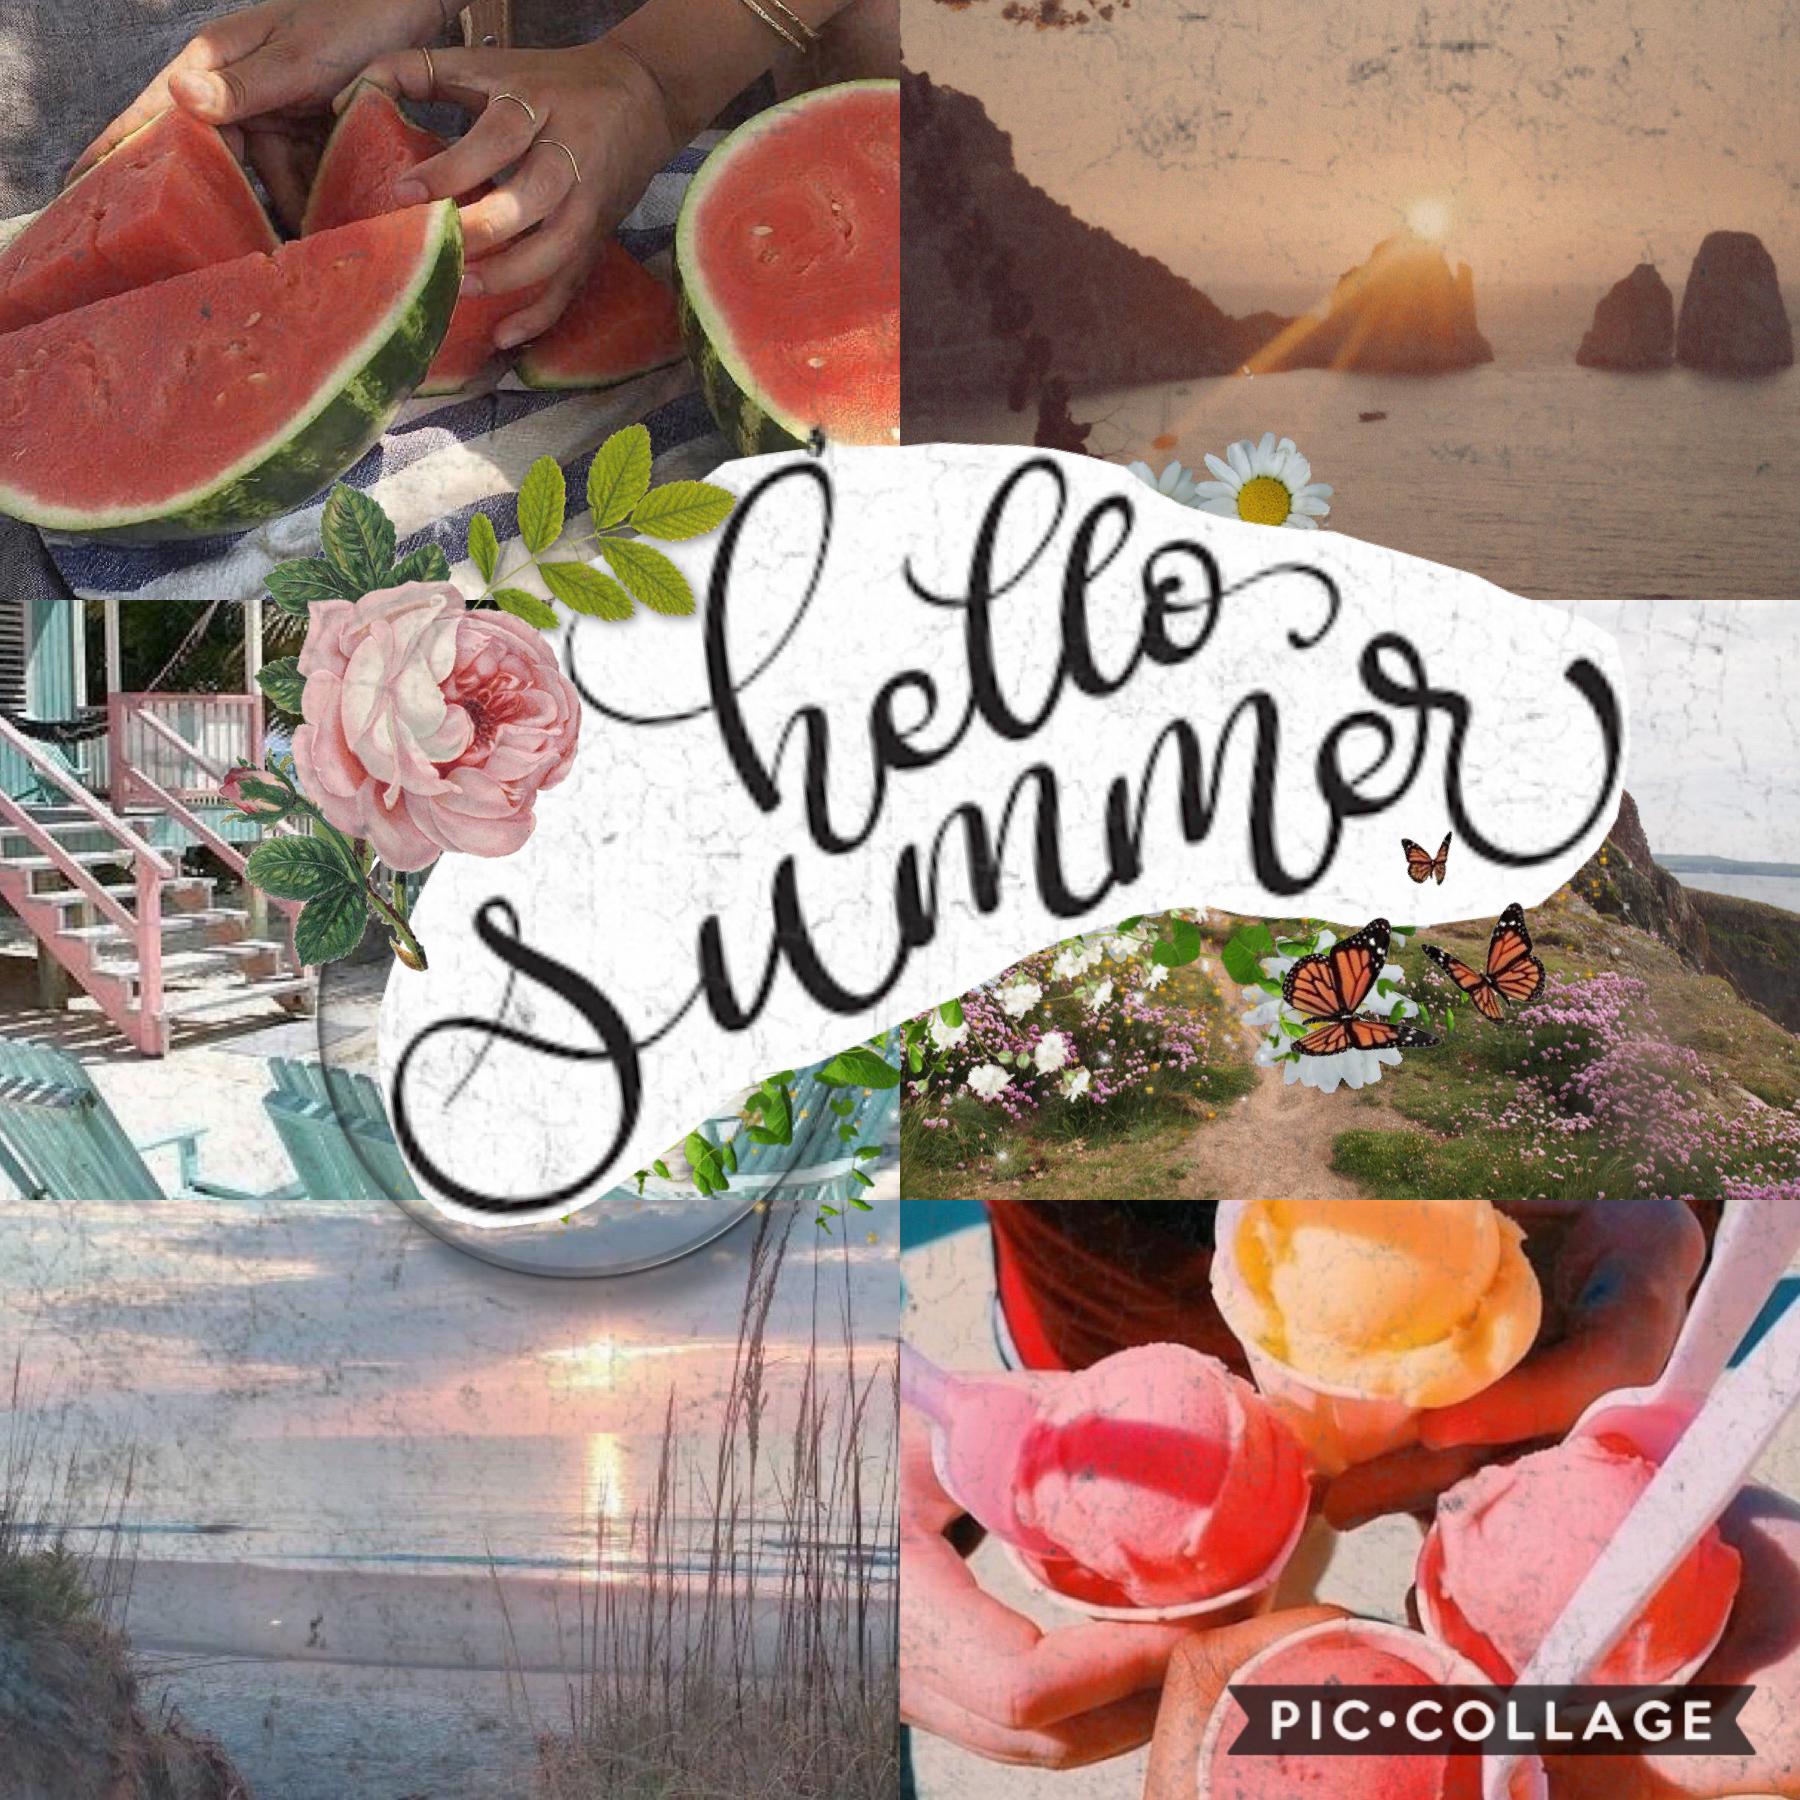 happy June! aka basically the start of the summer!
entry into deluded’s contest, so a collage like my first collage I posted!
another double post will literally not happen again so enjoy it lol